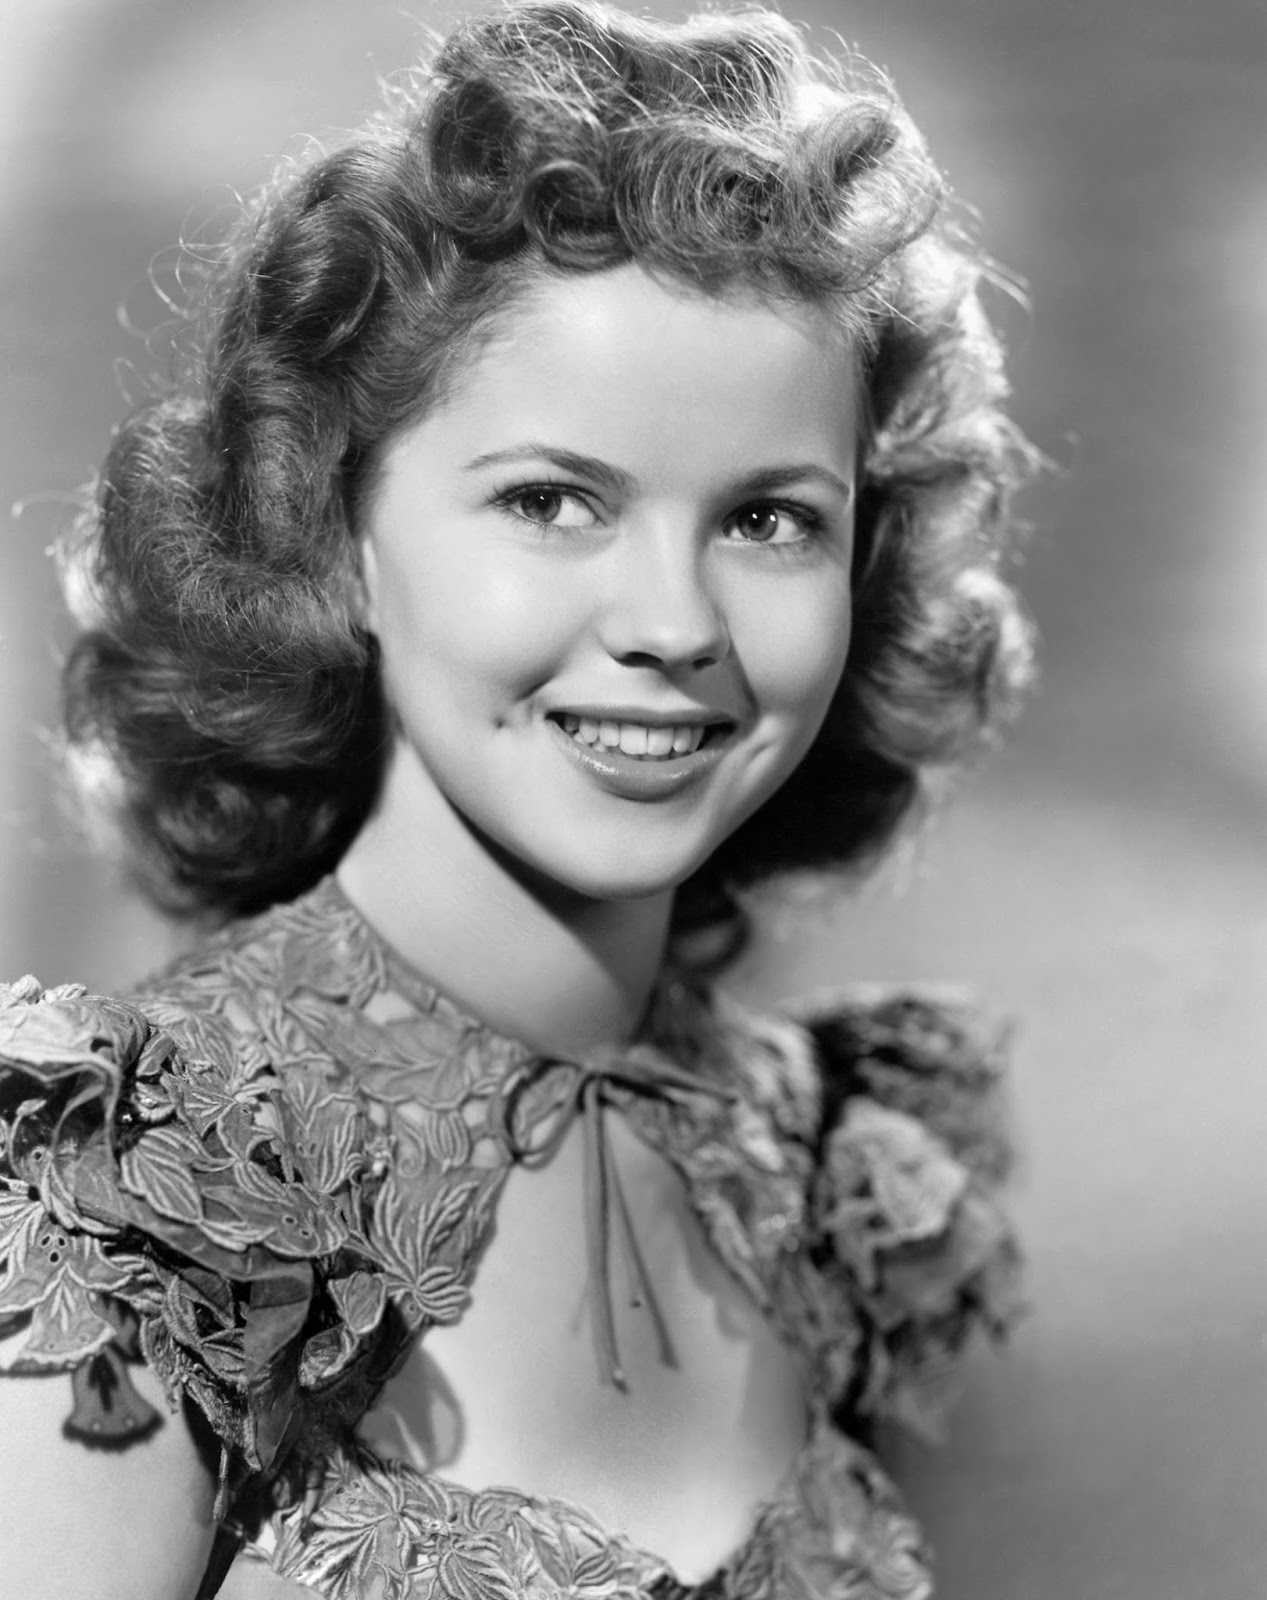 BOOKSTEVE'S LIBRARY: Rest In Peace Shirley Temple